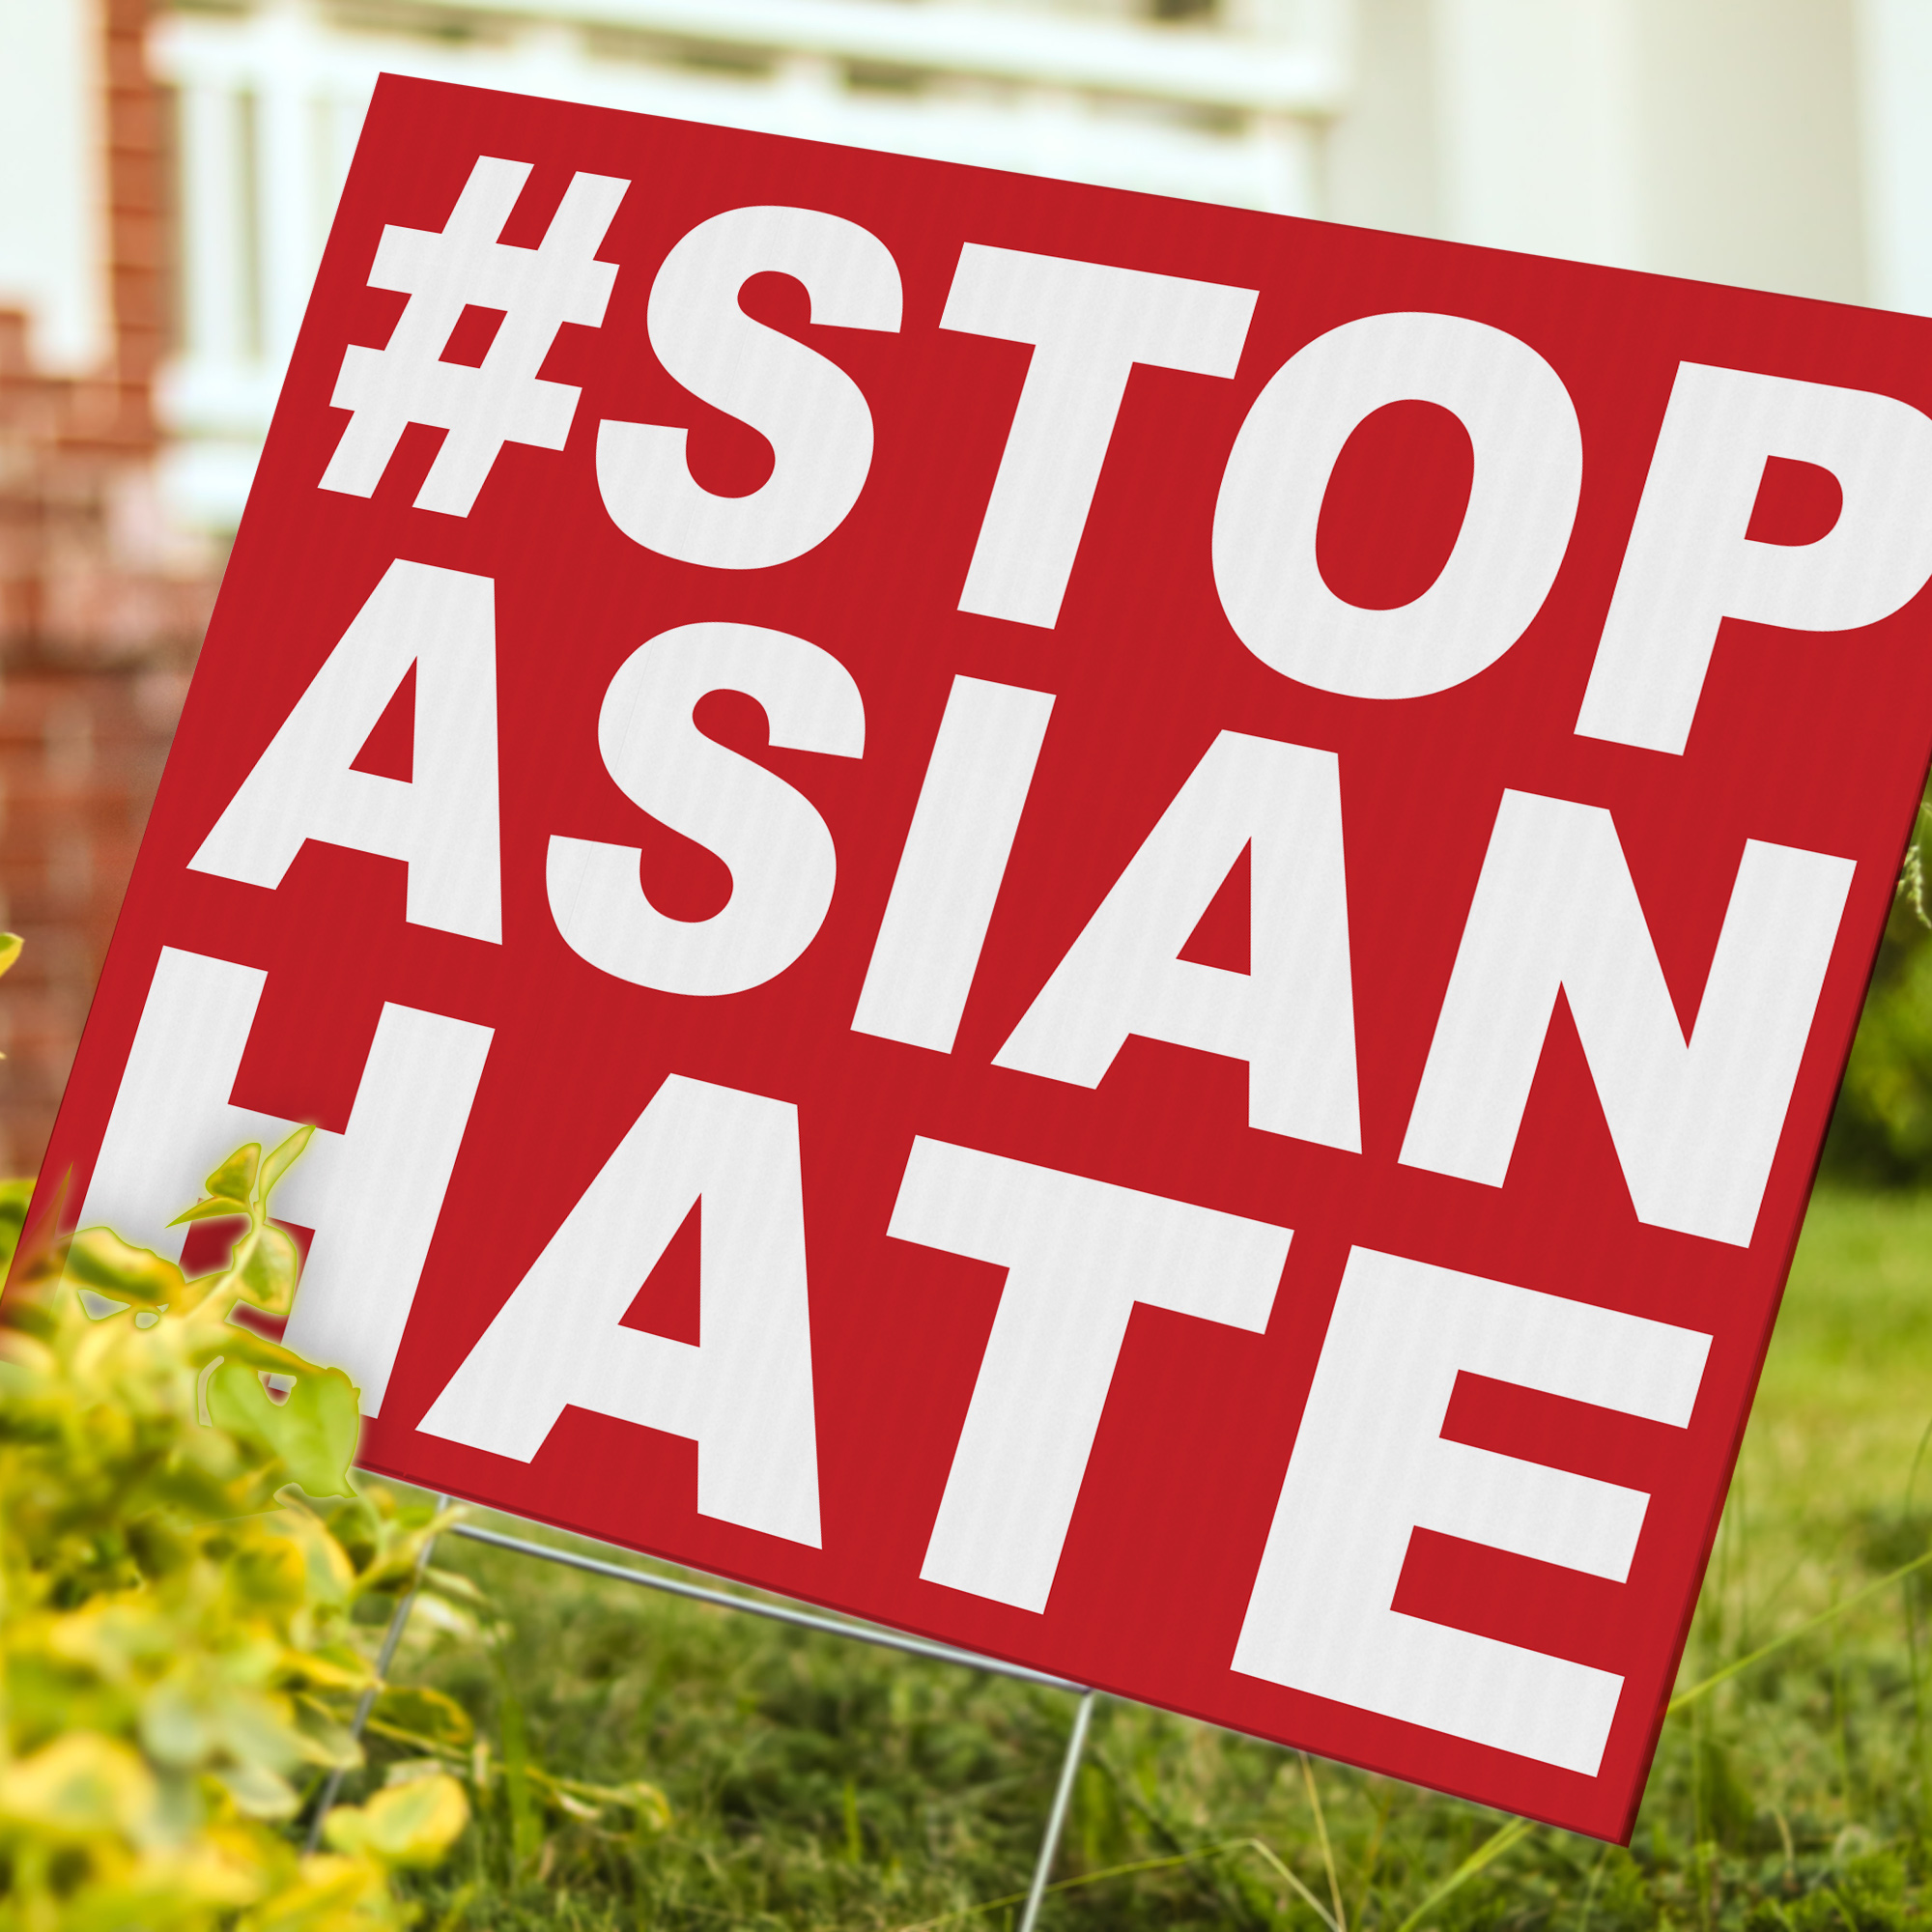 Stop Asian Hate Yard Sign - 24 x 18 inch